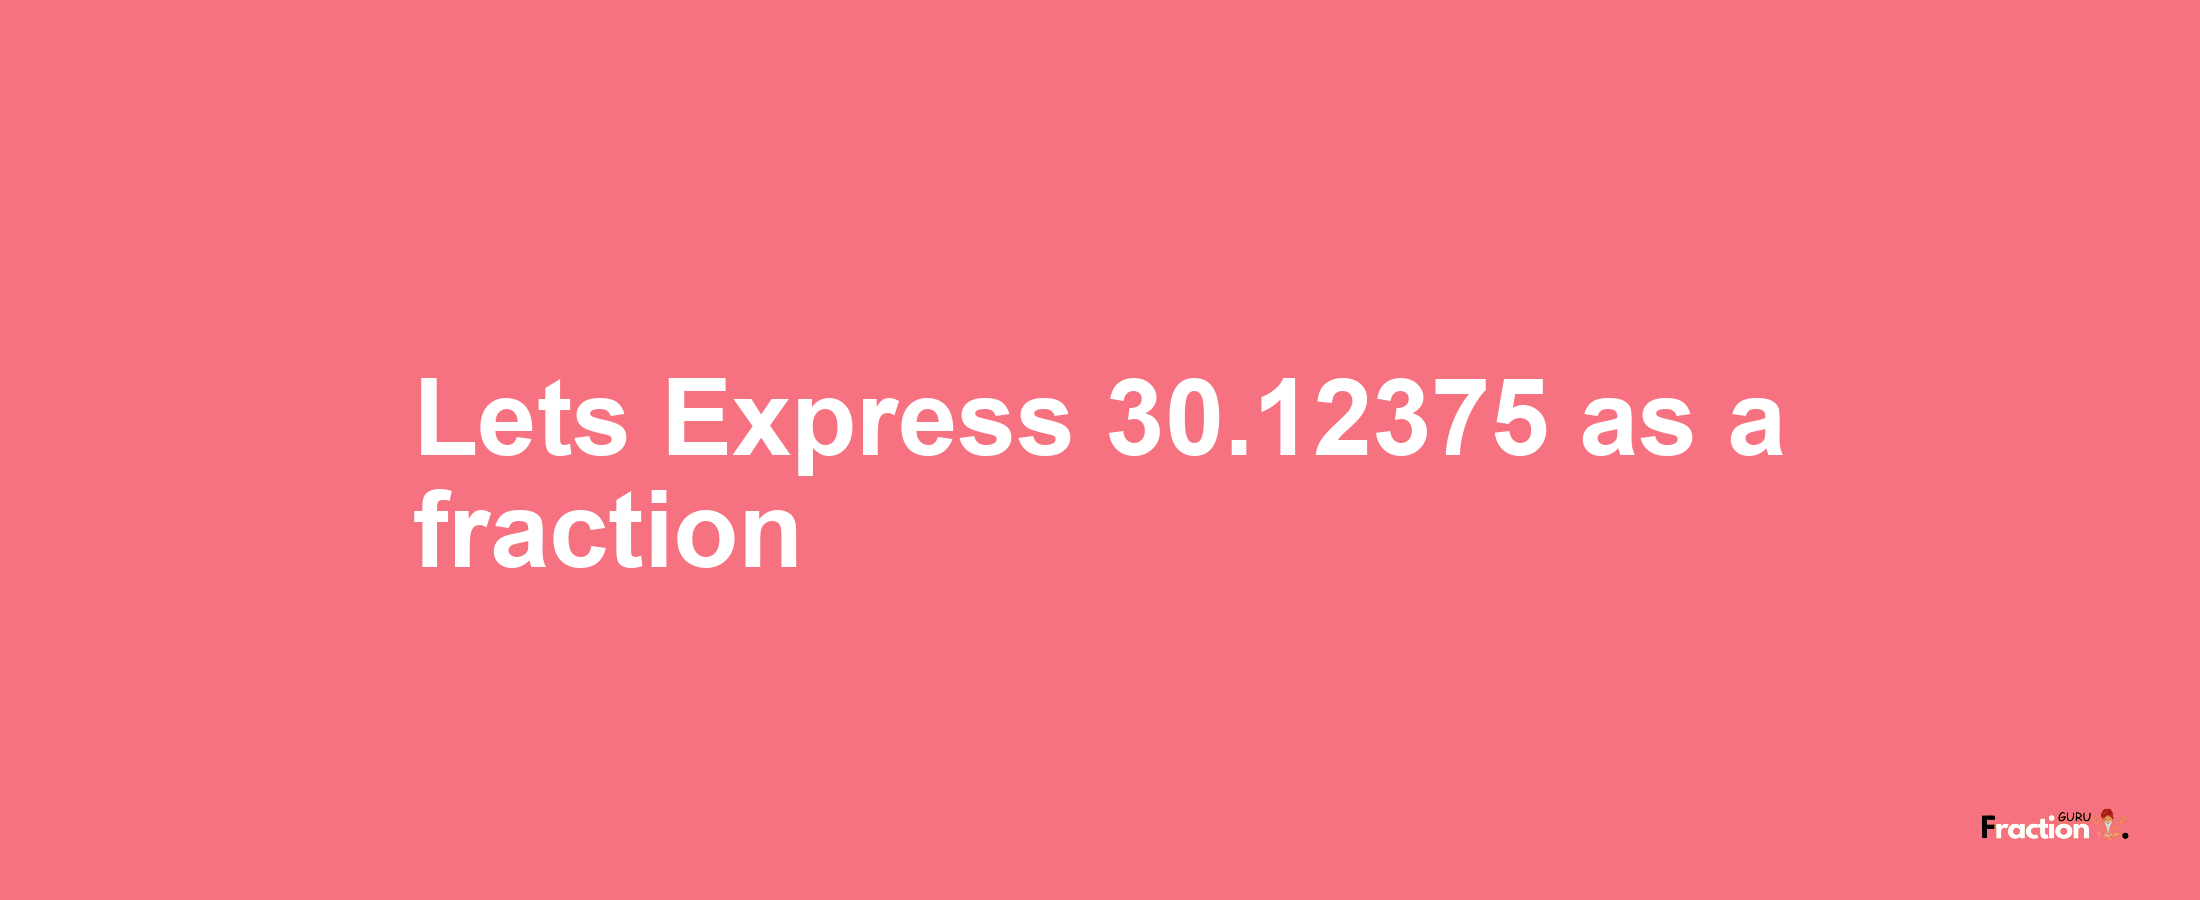 Lets Express 30.12375 as afraction